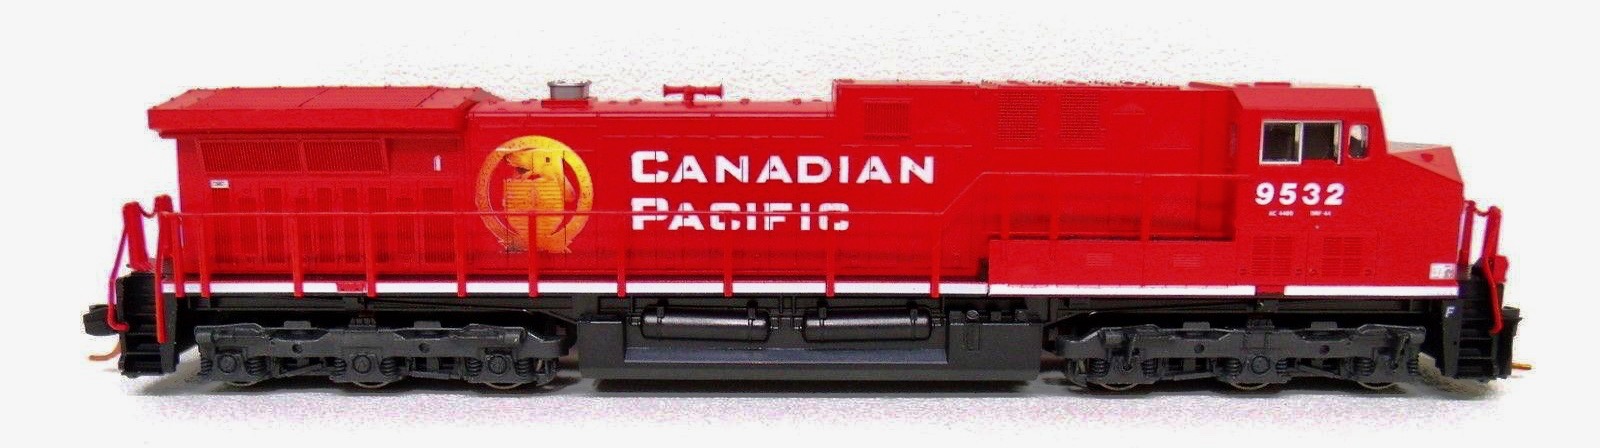 N Scale - Kato USA - 176-7214 - Locomotive, Diesel, GE AC4400CW - Canadian Pacific - 9532